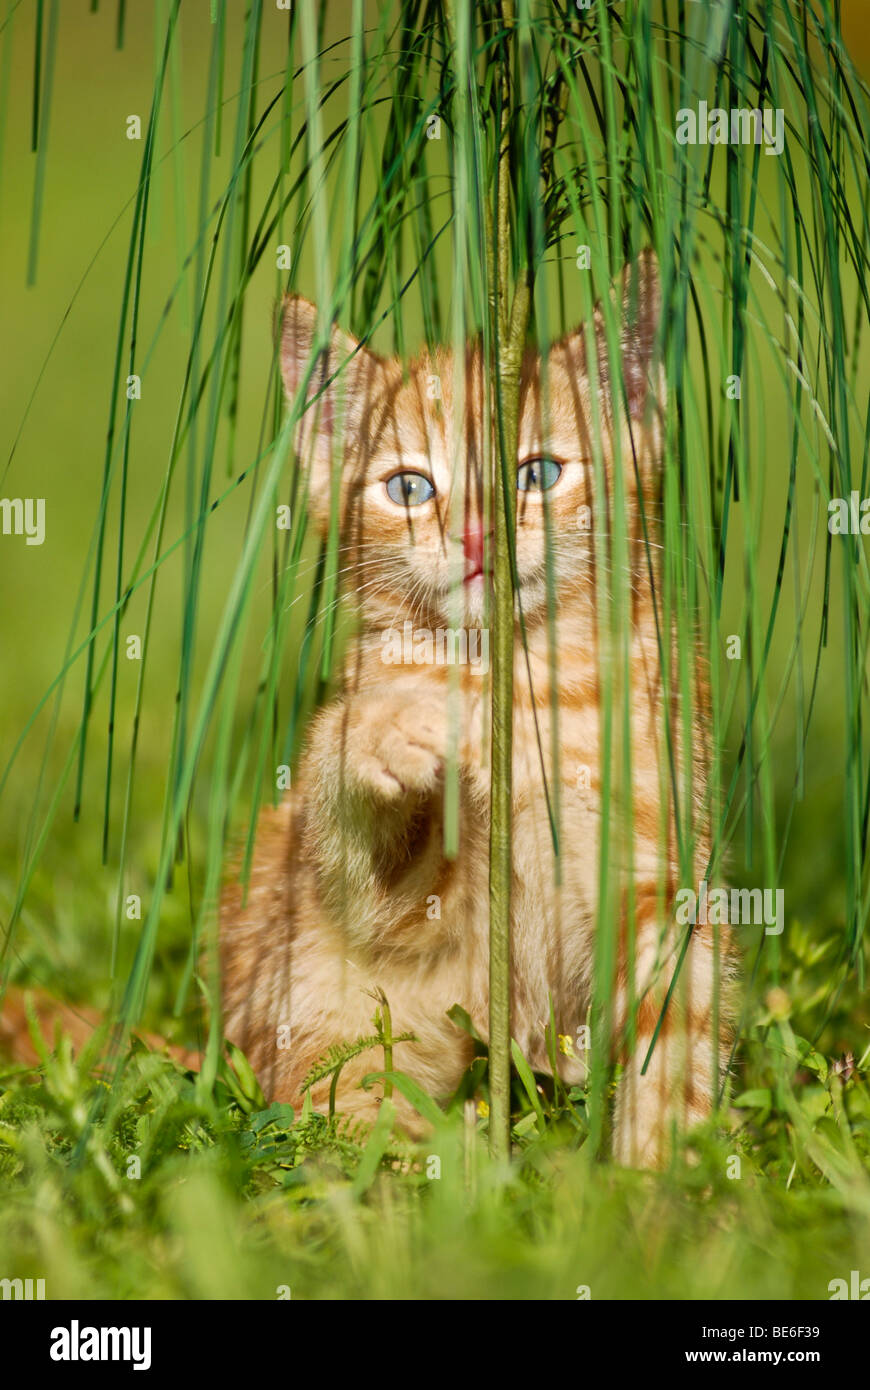 Domestic cat, kitten playing with ornamental grass Stock Photo